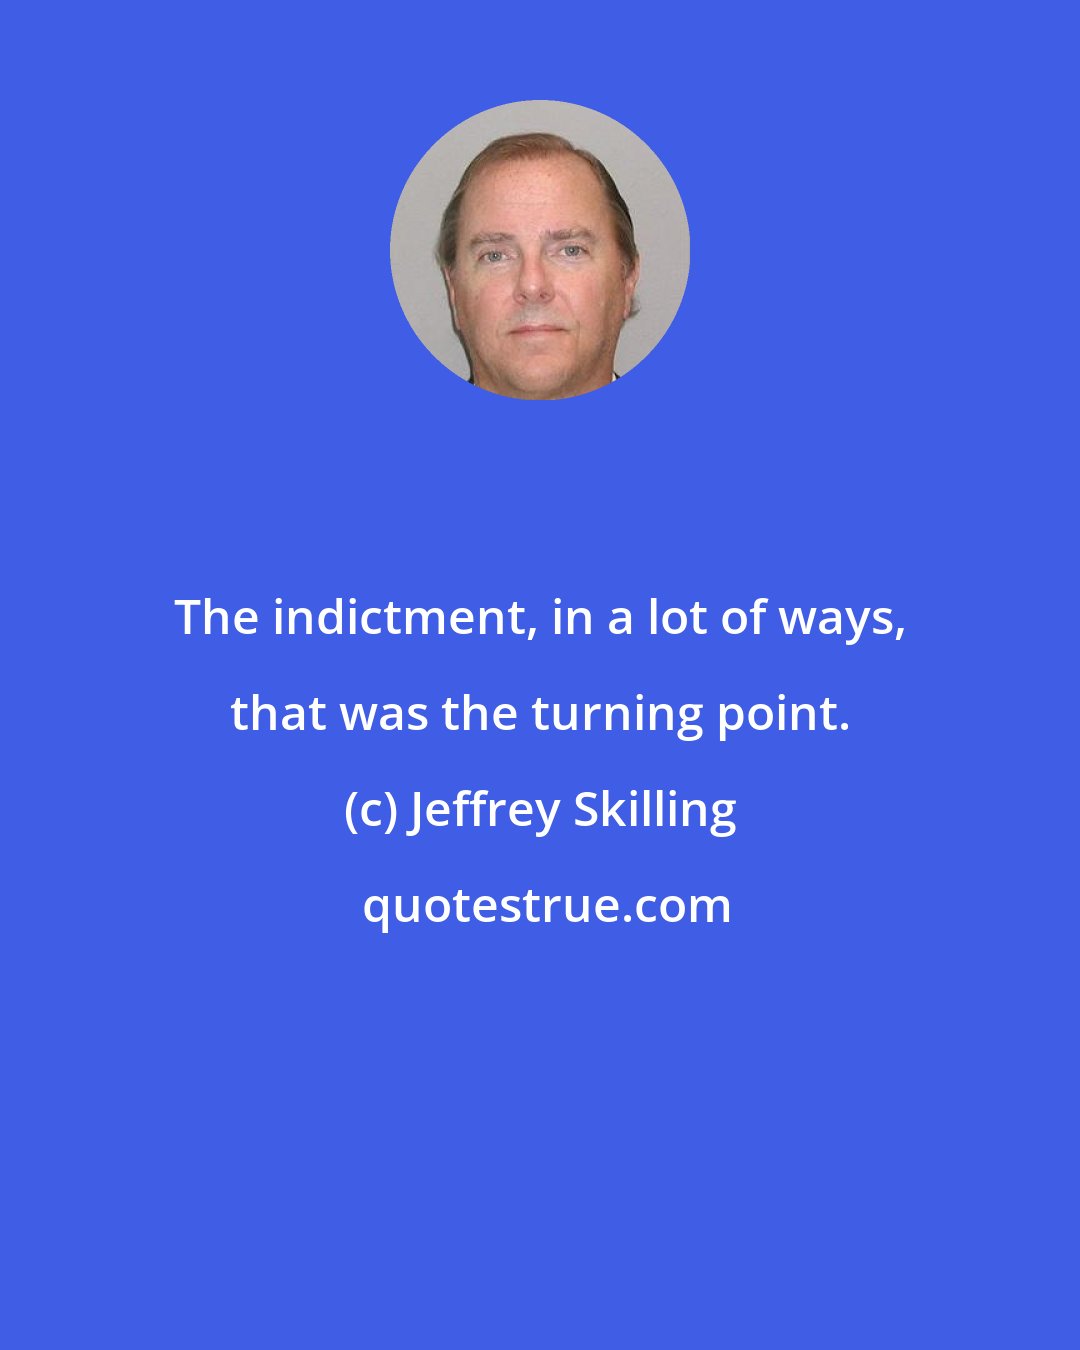 Jeffrey Skilling: The indictment, in a lot of ways, that was the turning point.